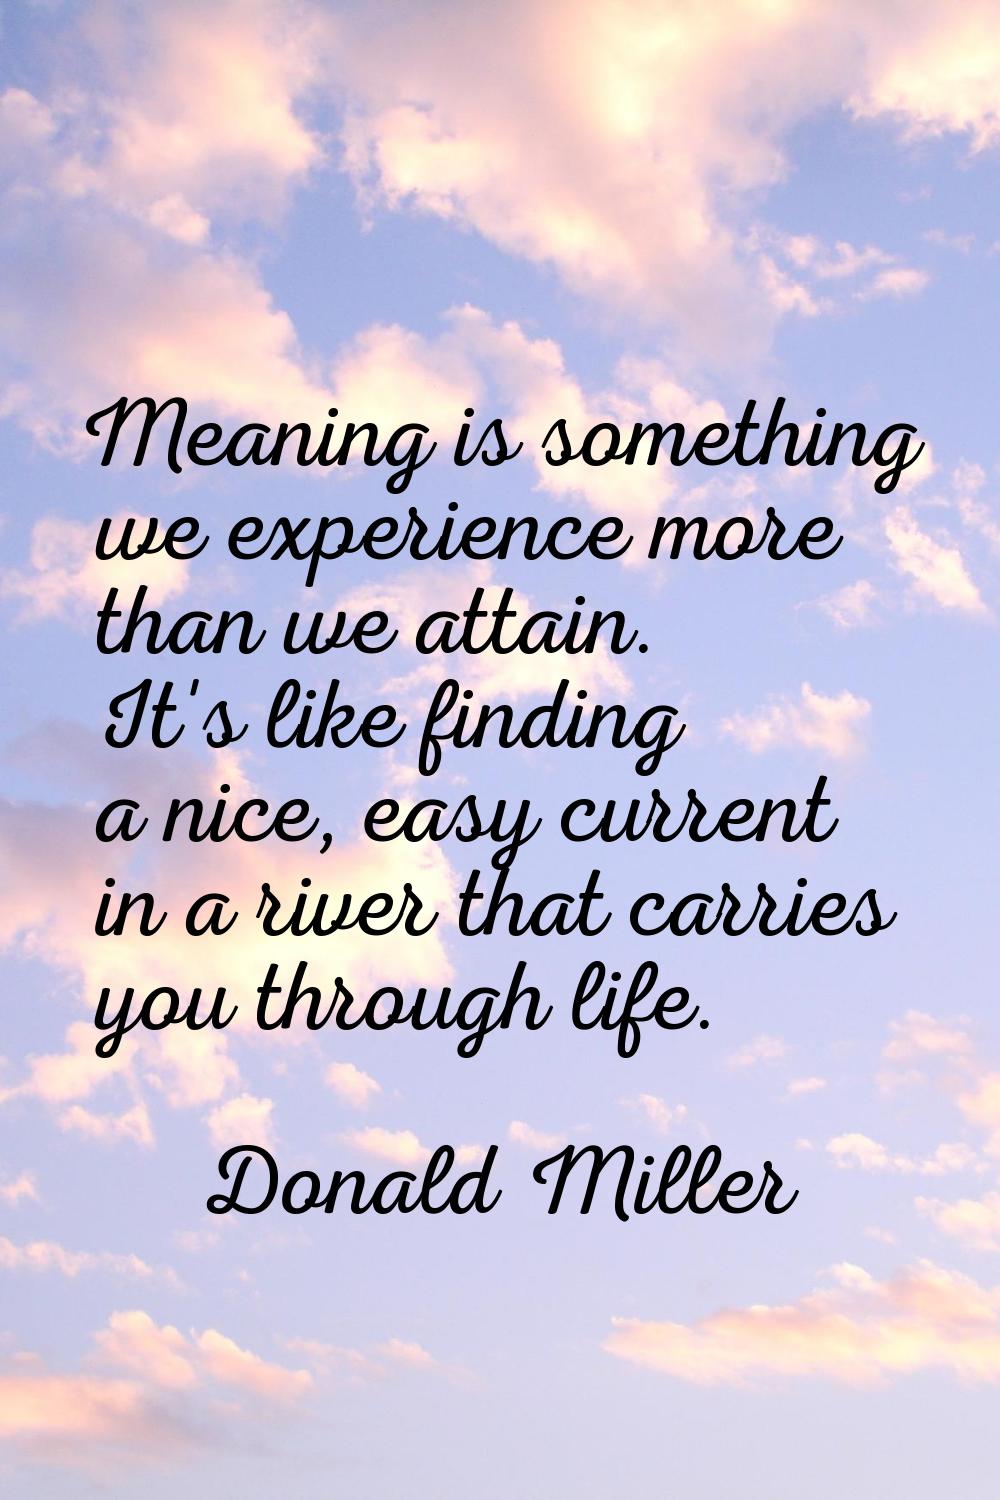 Meaning is something we experience more than we attain. It's like finding a nice, easy current in a